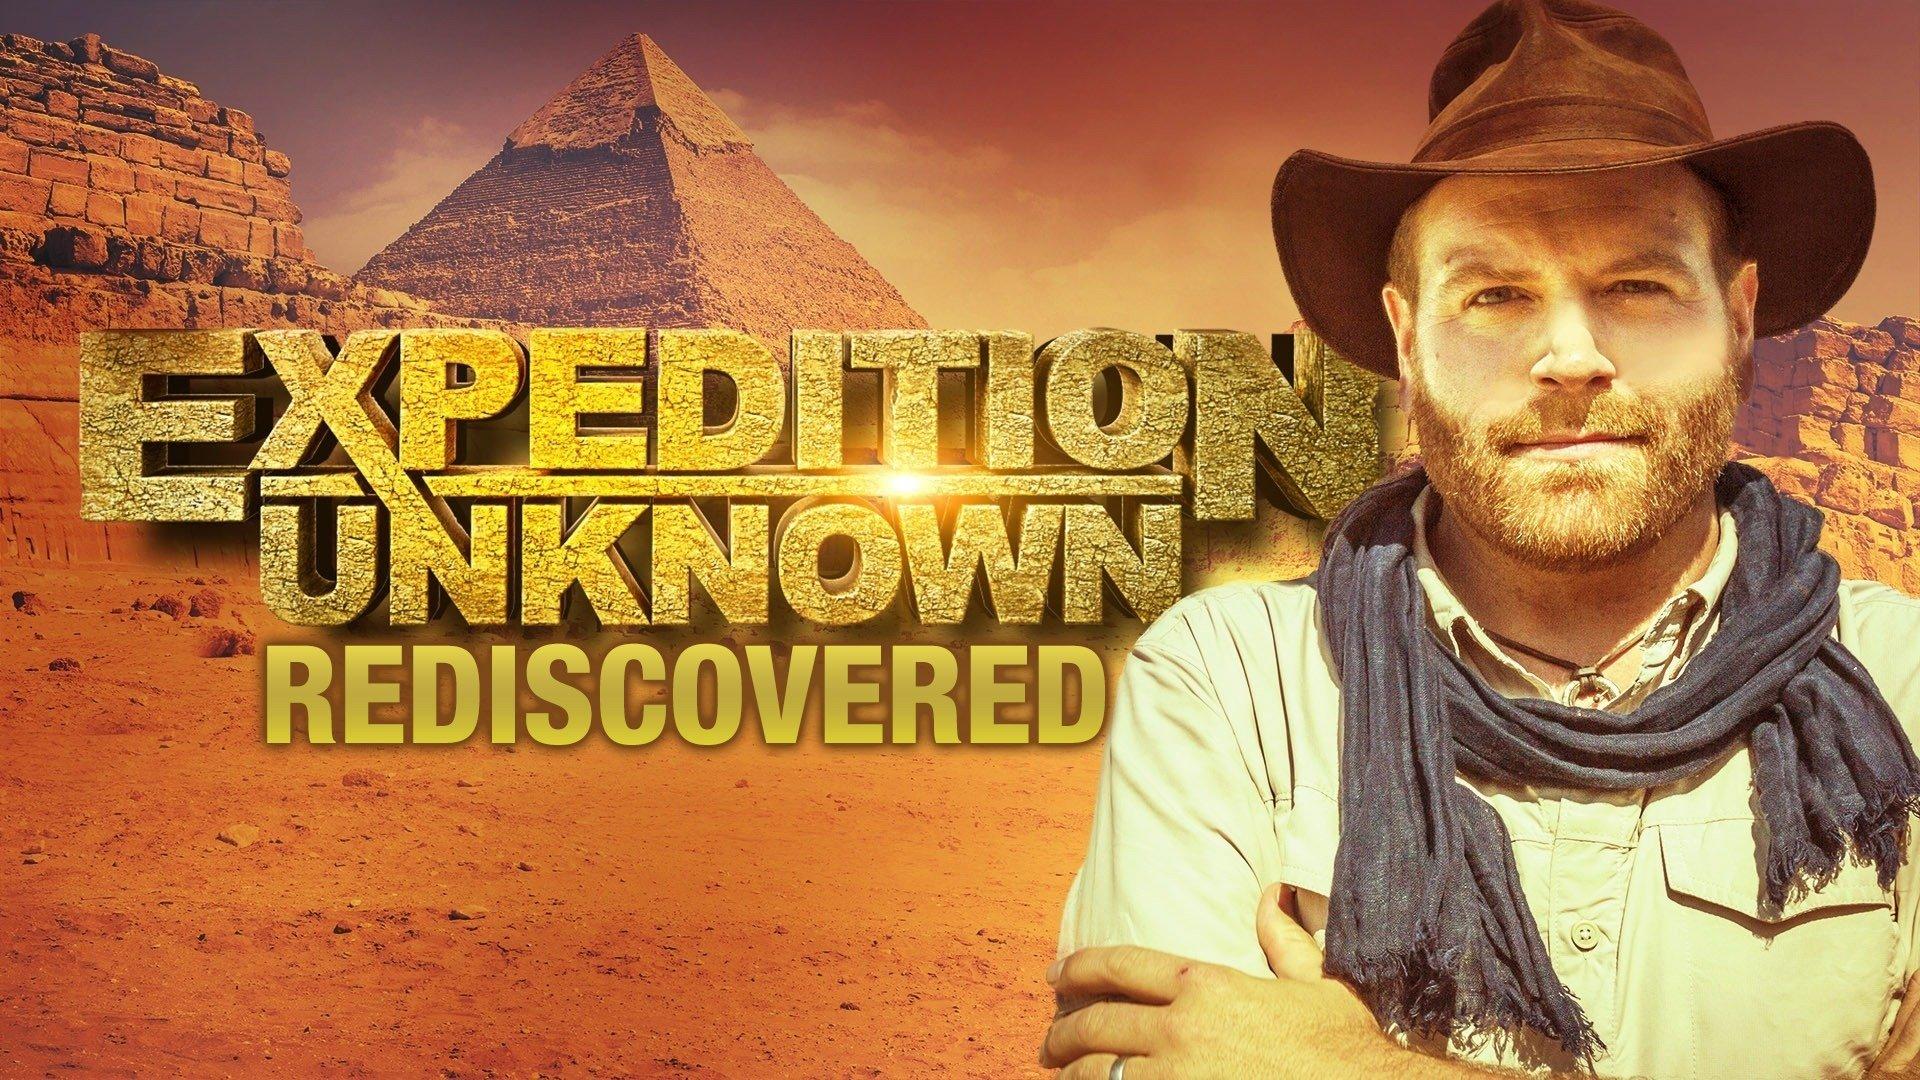 Watch Expedition Unknown Rediscovered Streaming Online on Philo (Free